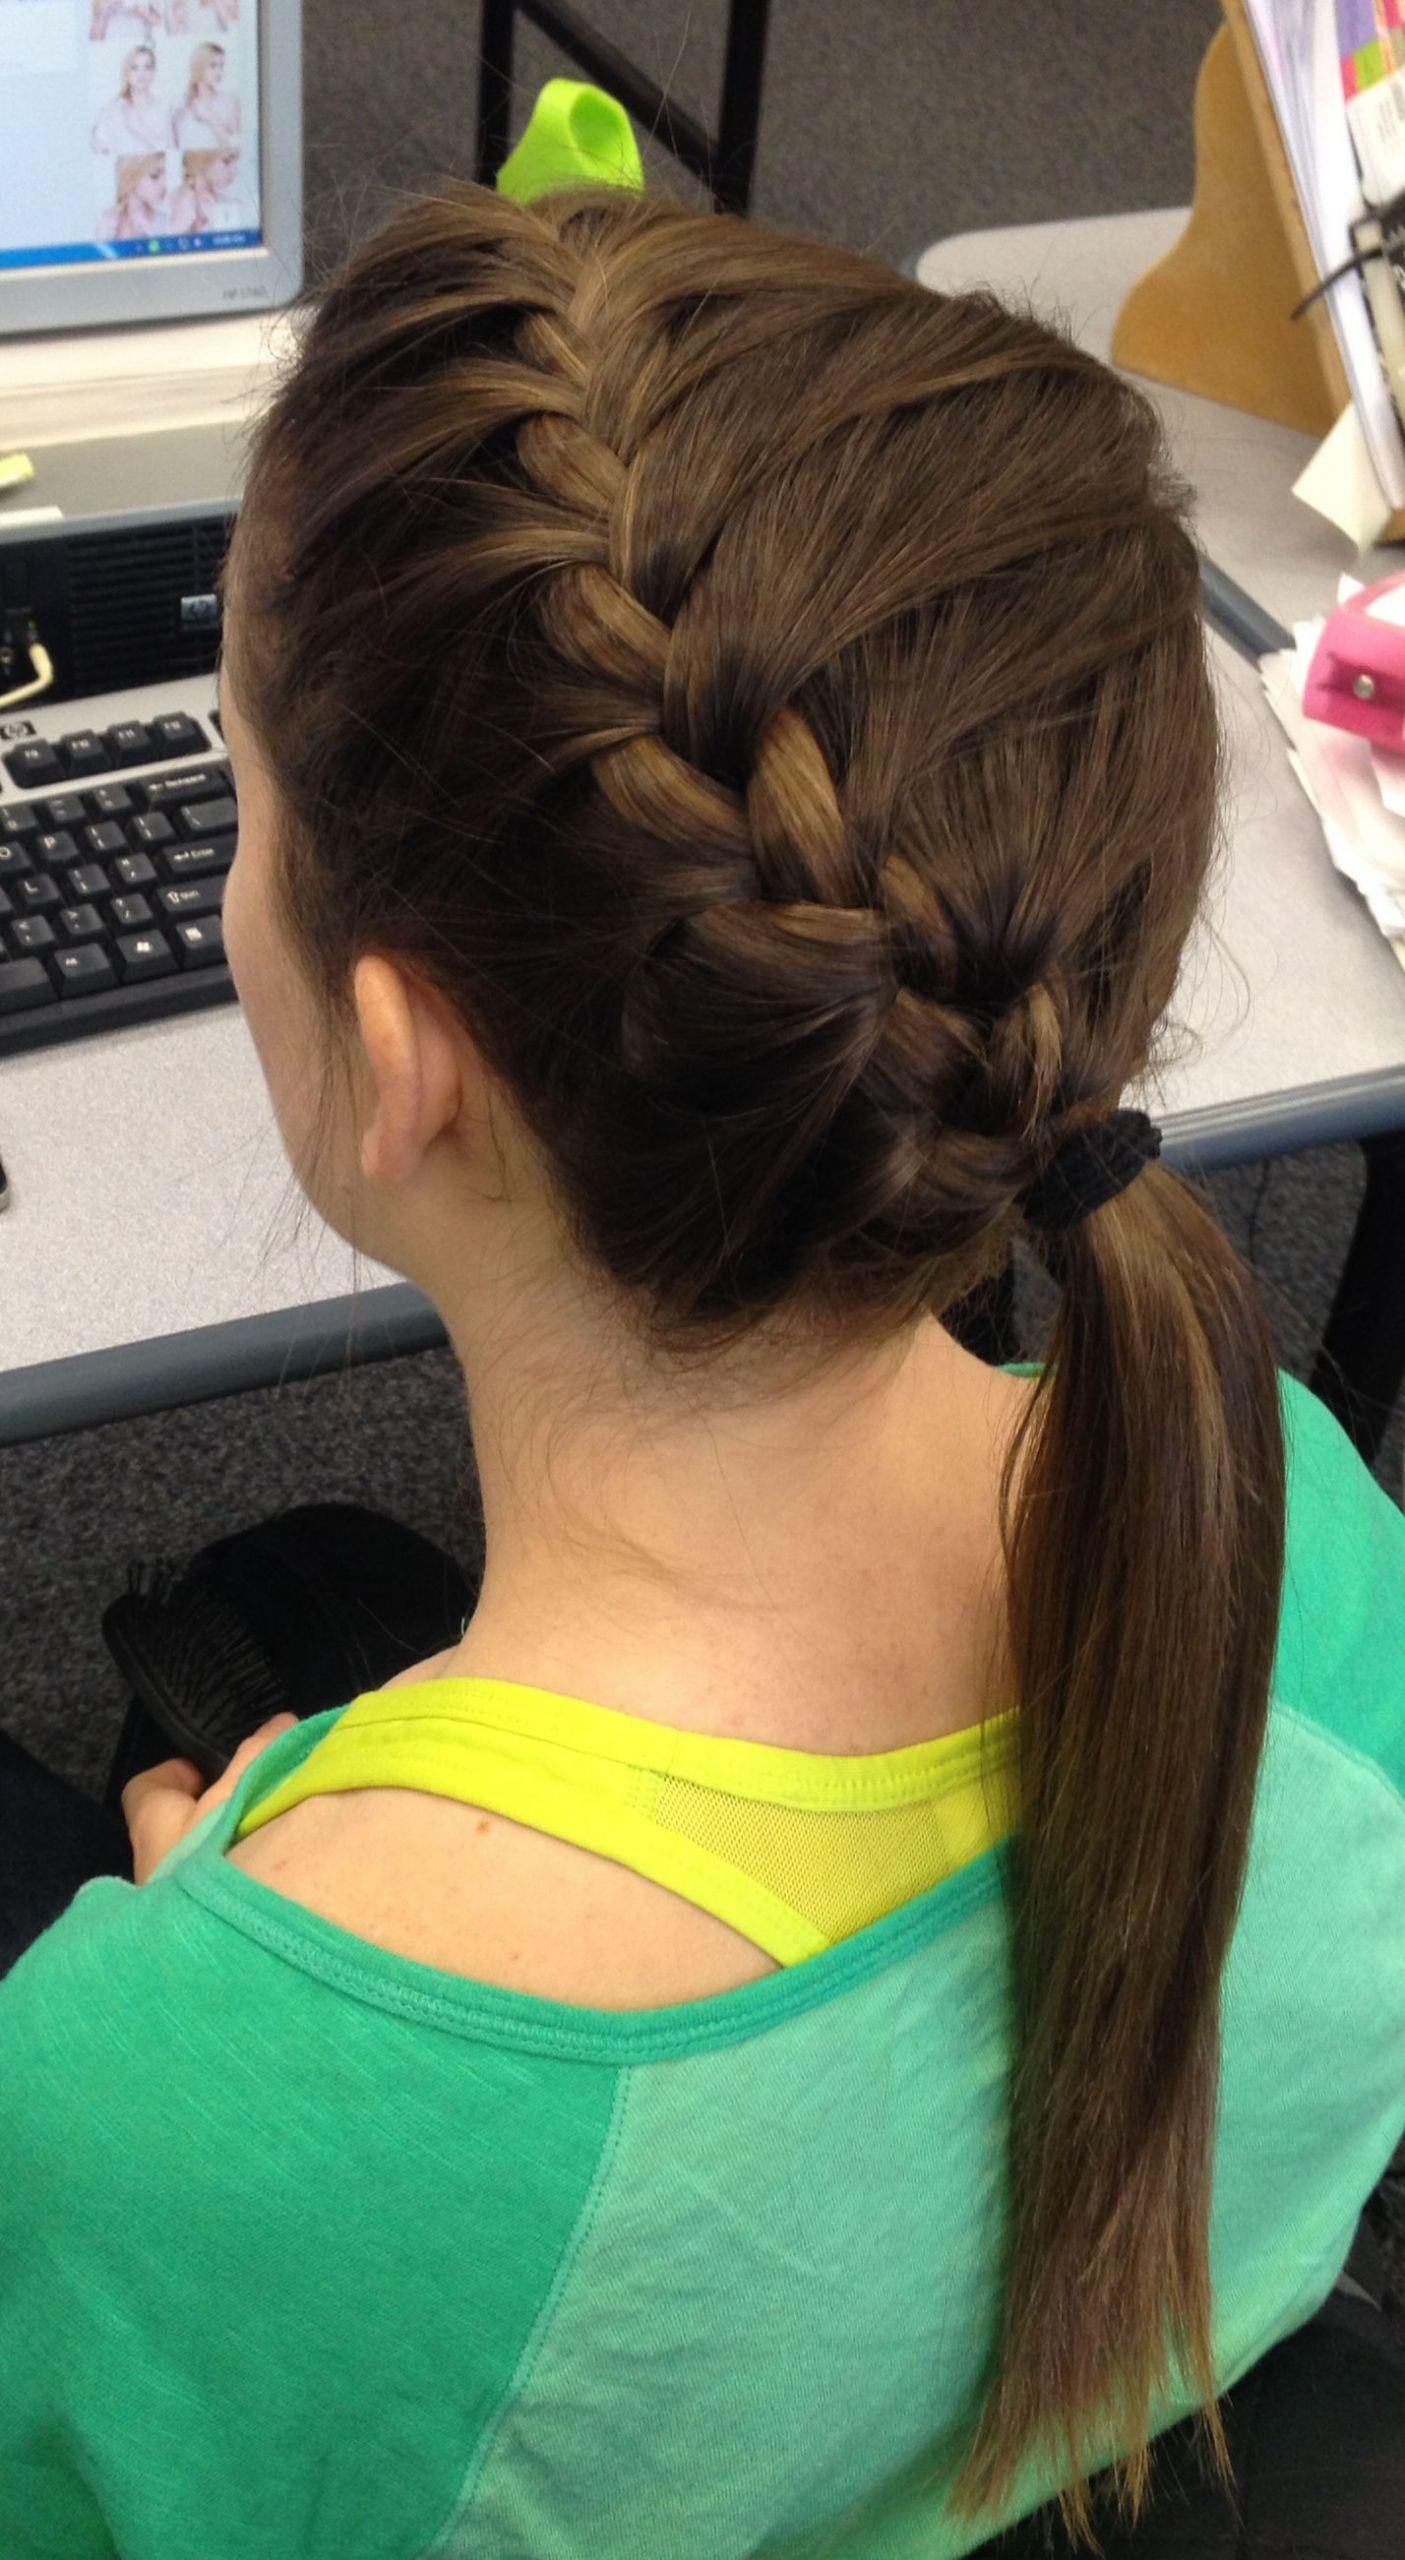 Cute Softball Hairstyles
 Megan s awesome "athletic" hair that I did off to the